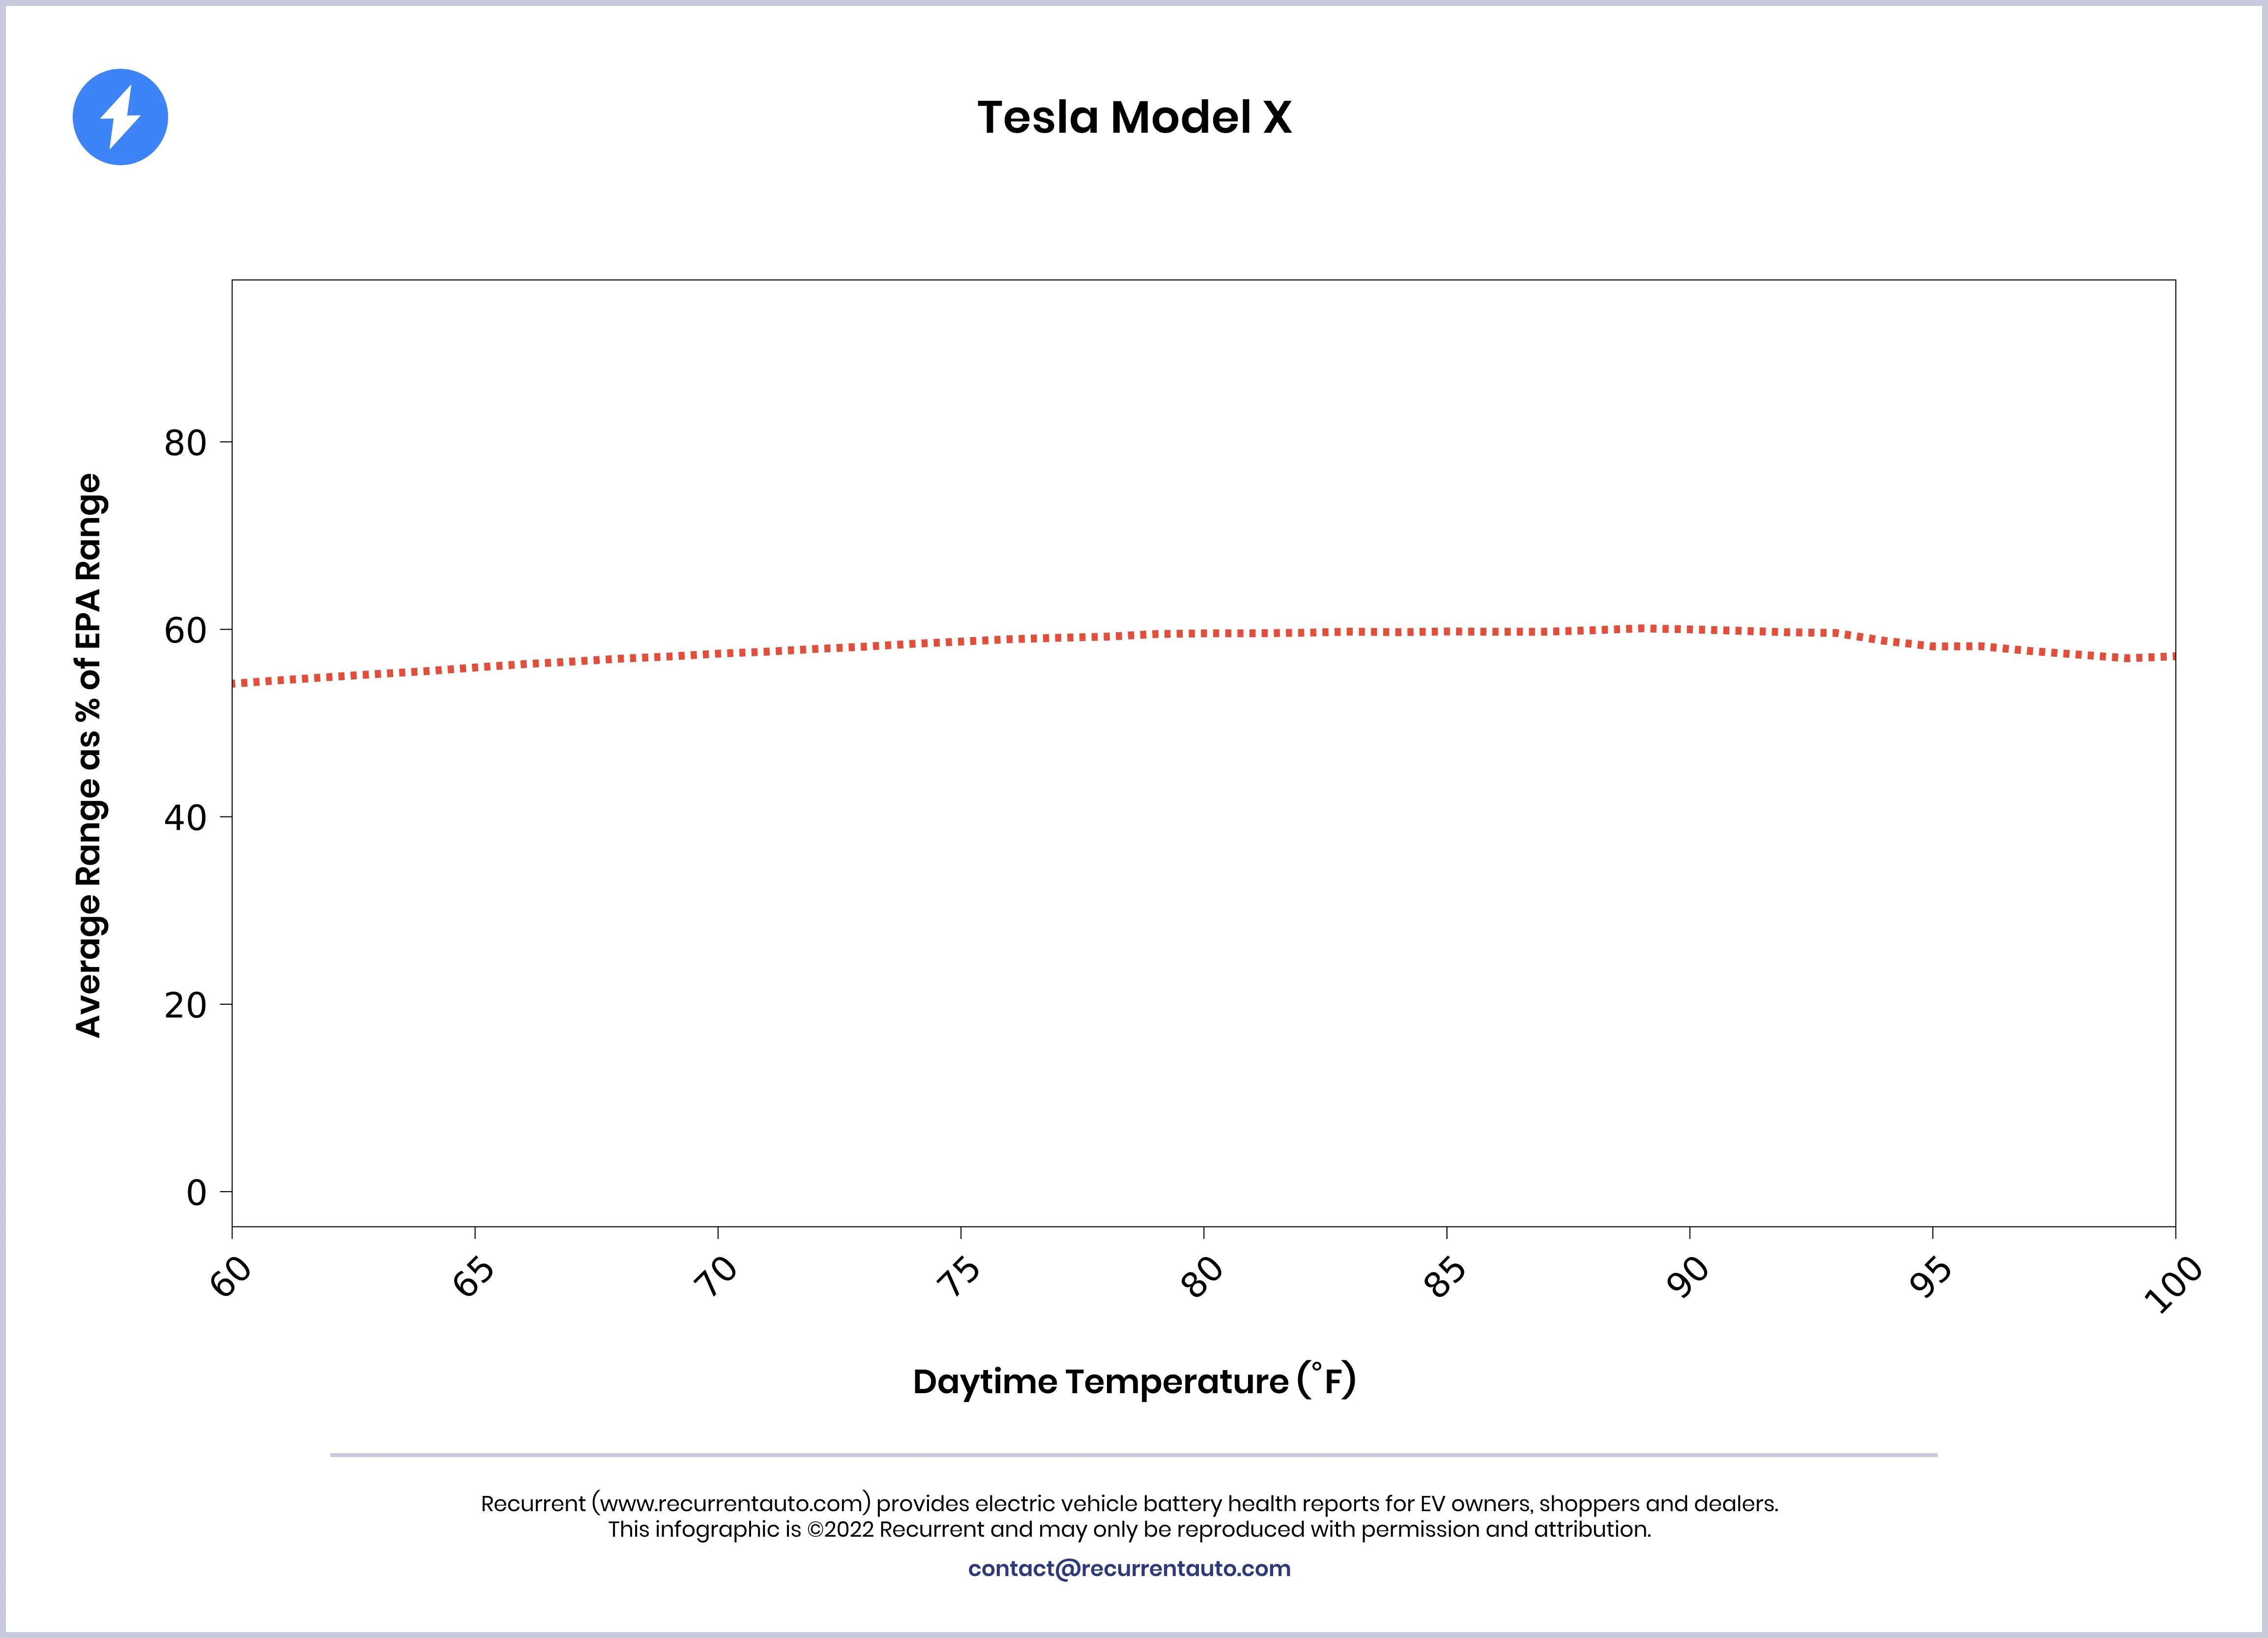 Range dependence on temperature for Model Y